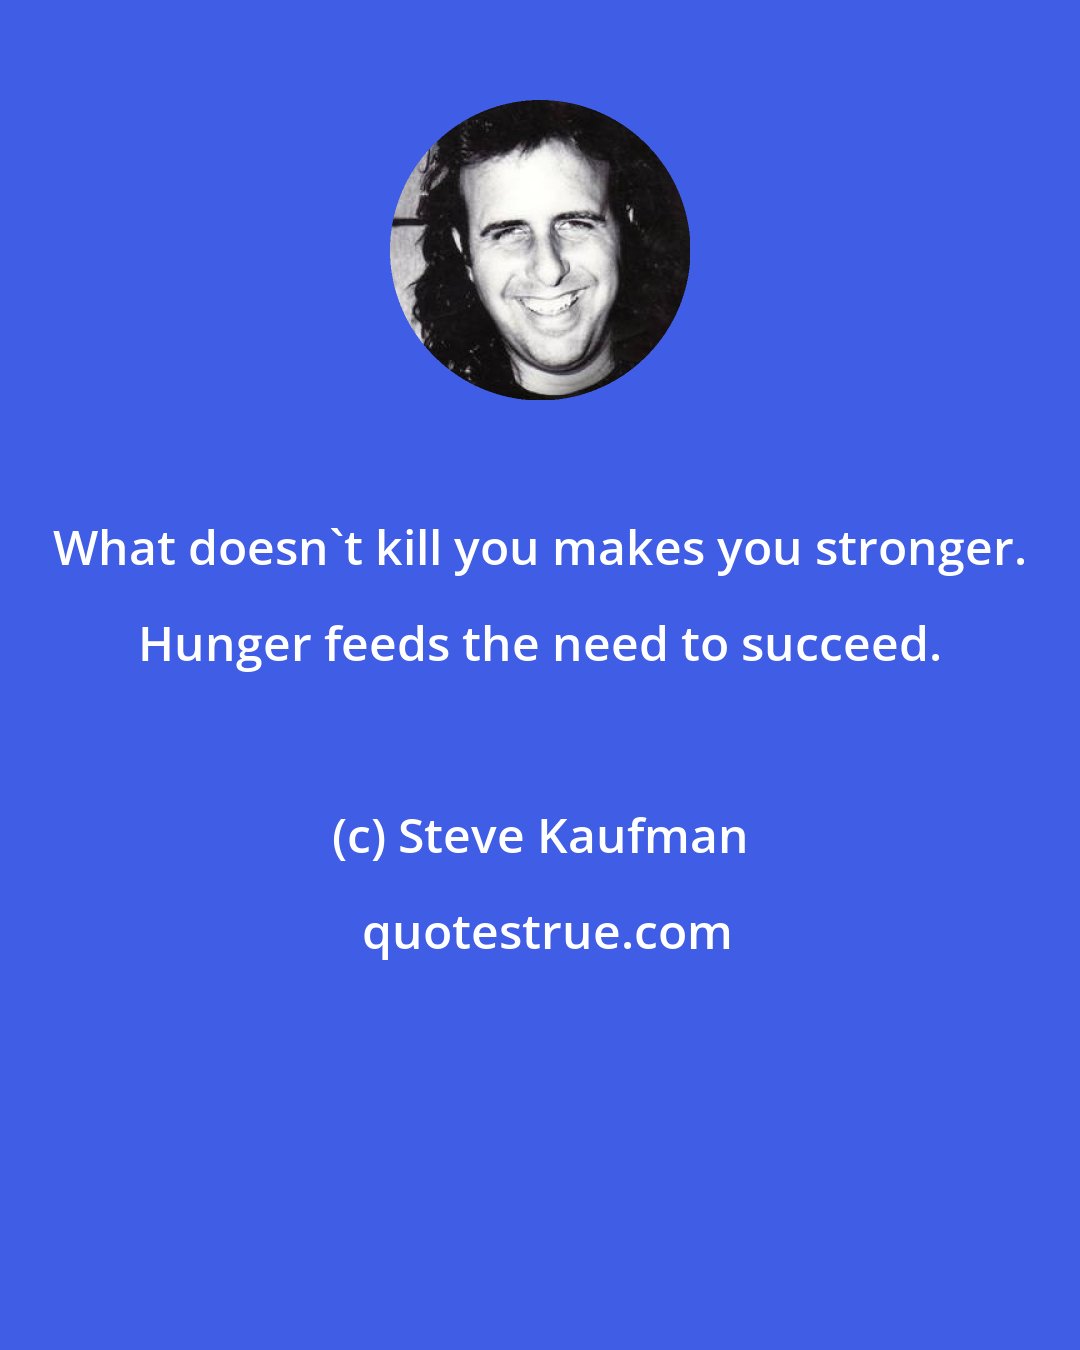 Steve Kaufman: What doesn't kill you makes you stronger. Hunger feeds the need to succeed.